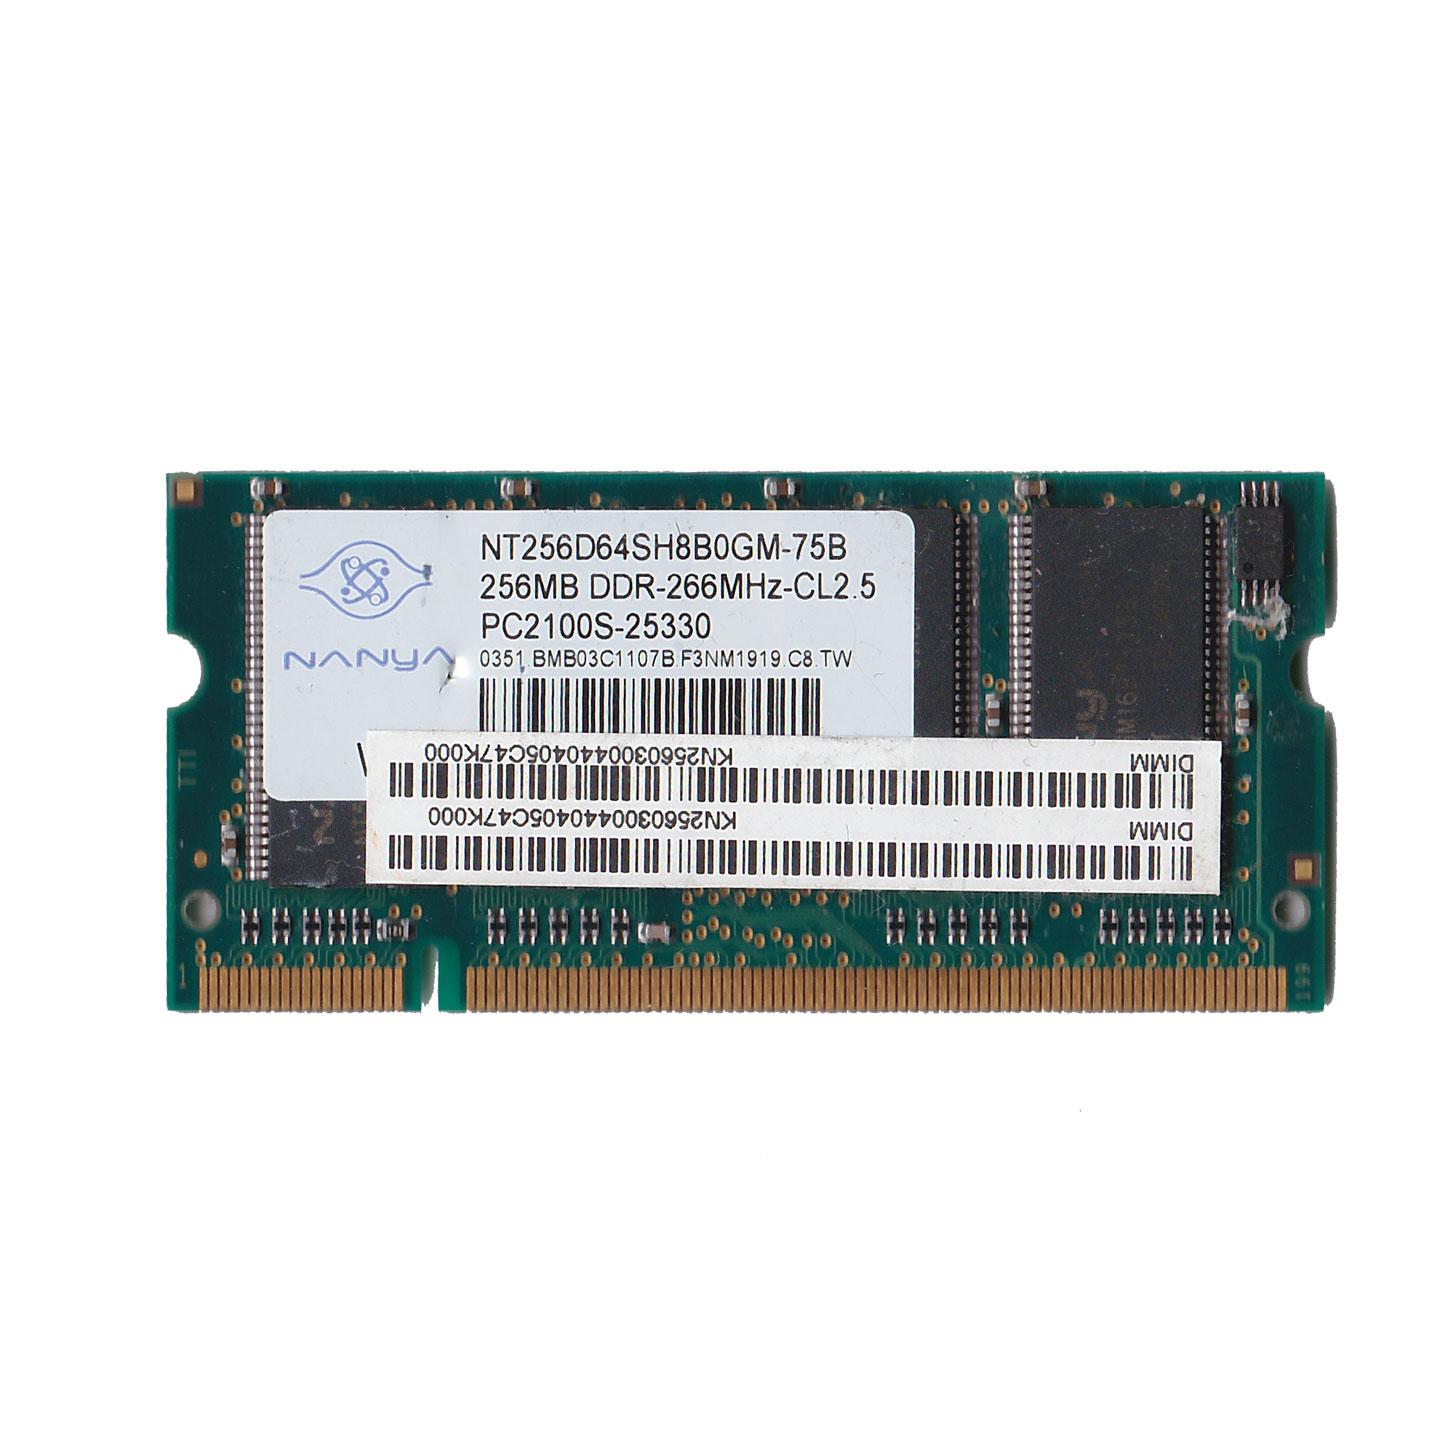 Preowned NANYA 256MB LAPTOP RAM DDR-266MHz-CL-2.5 PC2100S-25330 Memory Module (Untested)